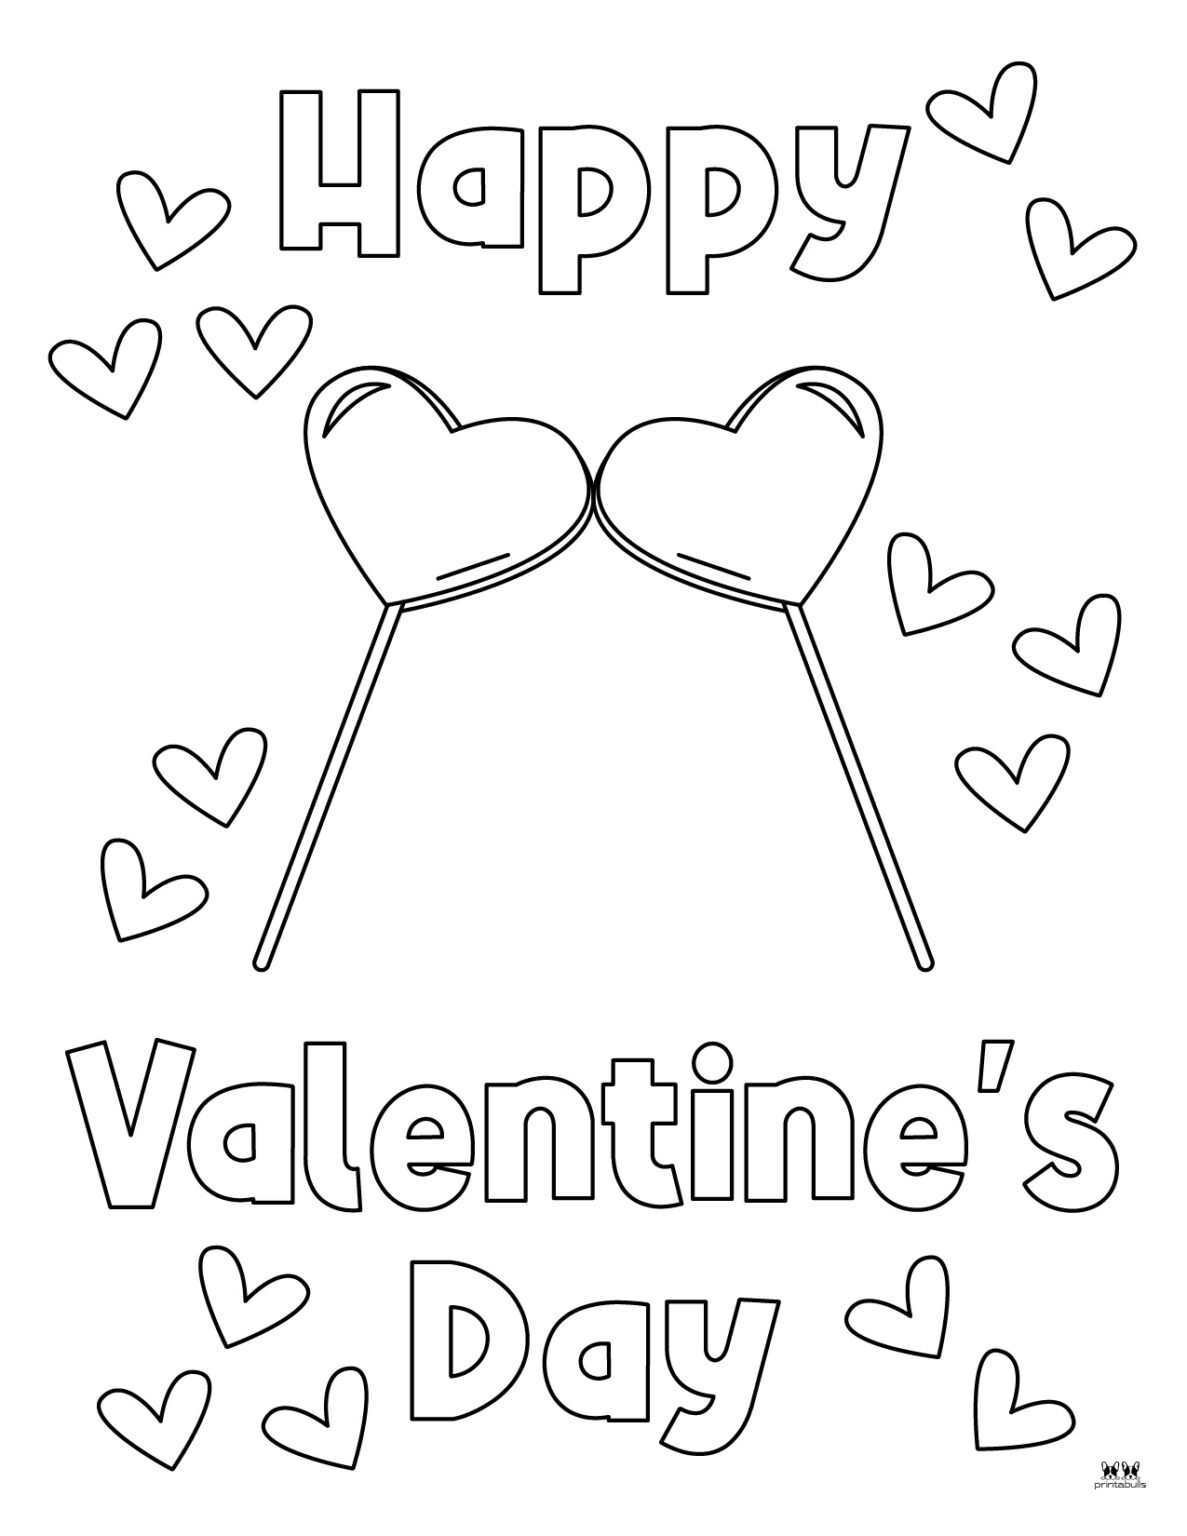 Happy Valentine's Day Coloring Pages - 15 Pages | Printabulls